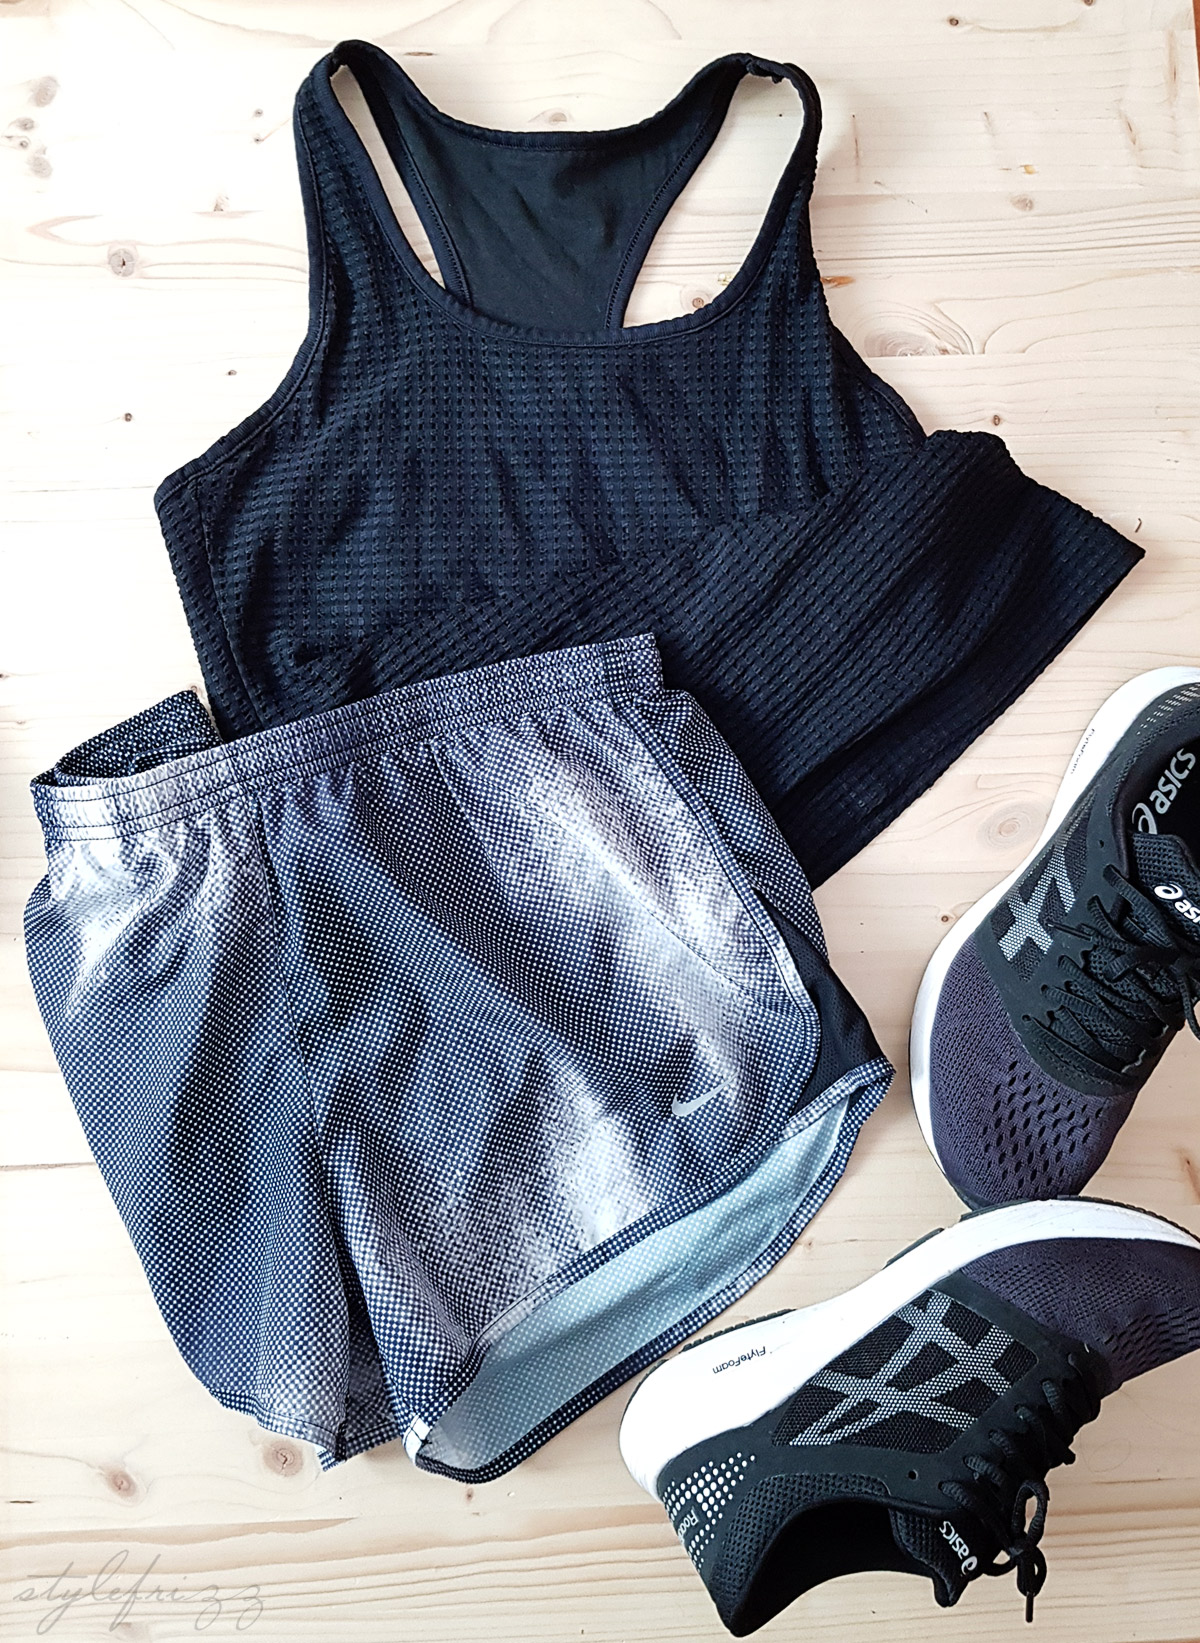 stylish running outfit